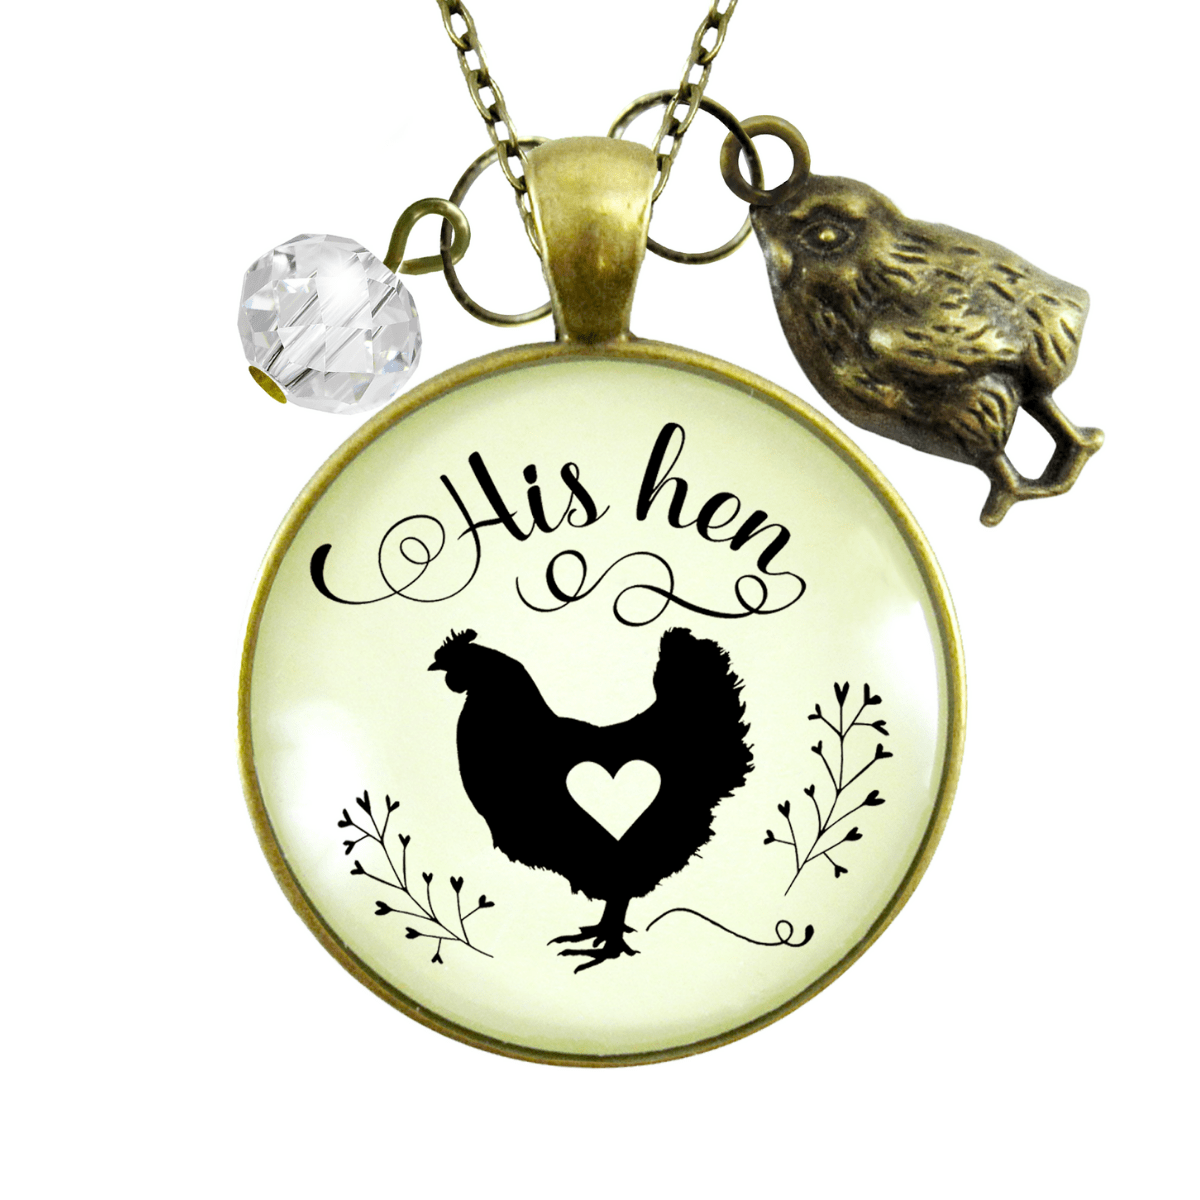 Gutsy Goodness His Hen Necklace For Chicken Mom Vintage Inspired Jewlery - Gutsy Goodness;His Hen Necklace For Chicken Mom Vintage Inspired Jewlery - Gutsy Goodness Handmade Jewelry Gifts